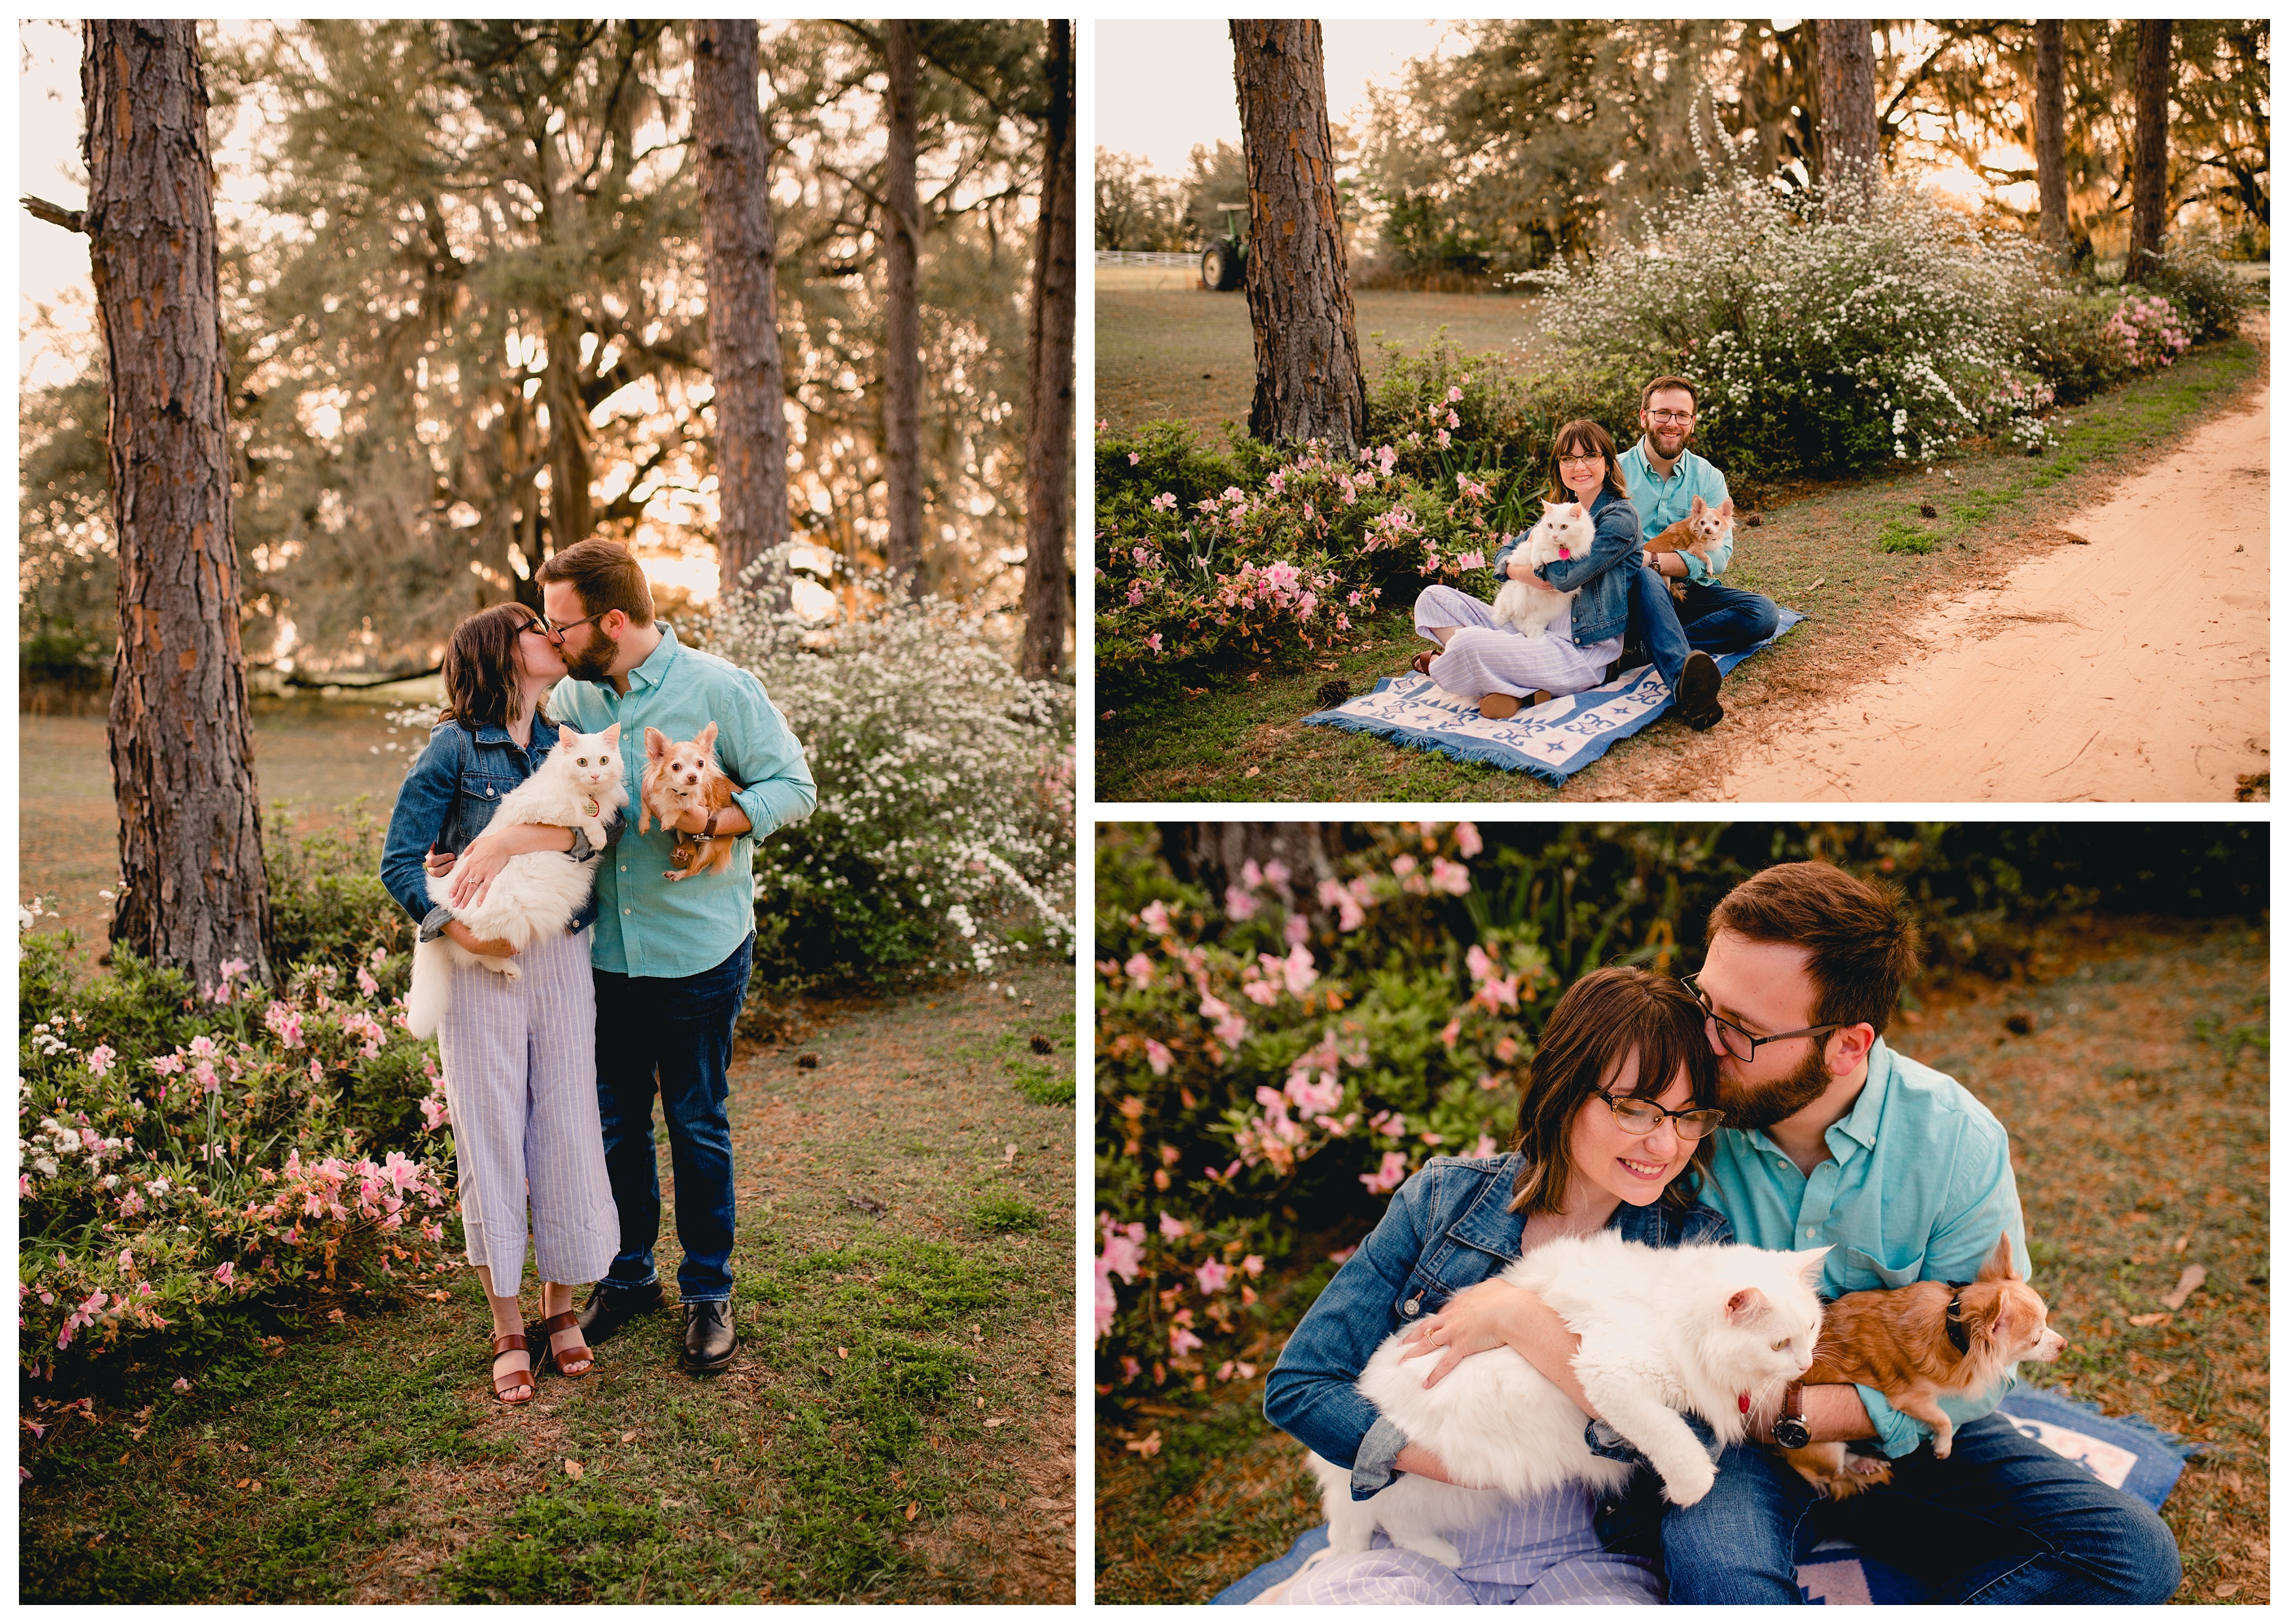 Tallahassee Pet photographer does photoshoot with engaged couple and their cat and dog. Shelly Williams photography